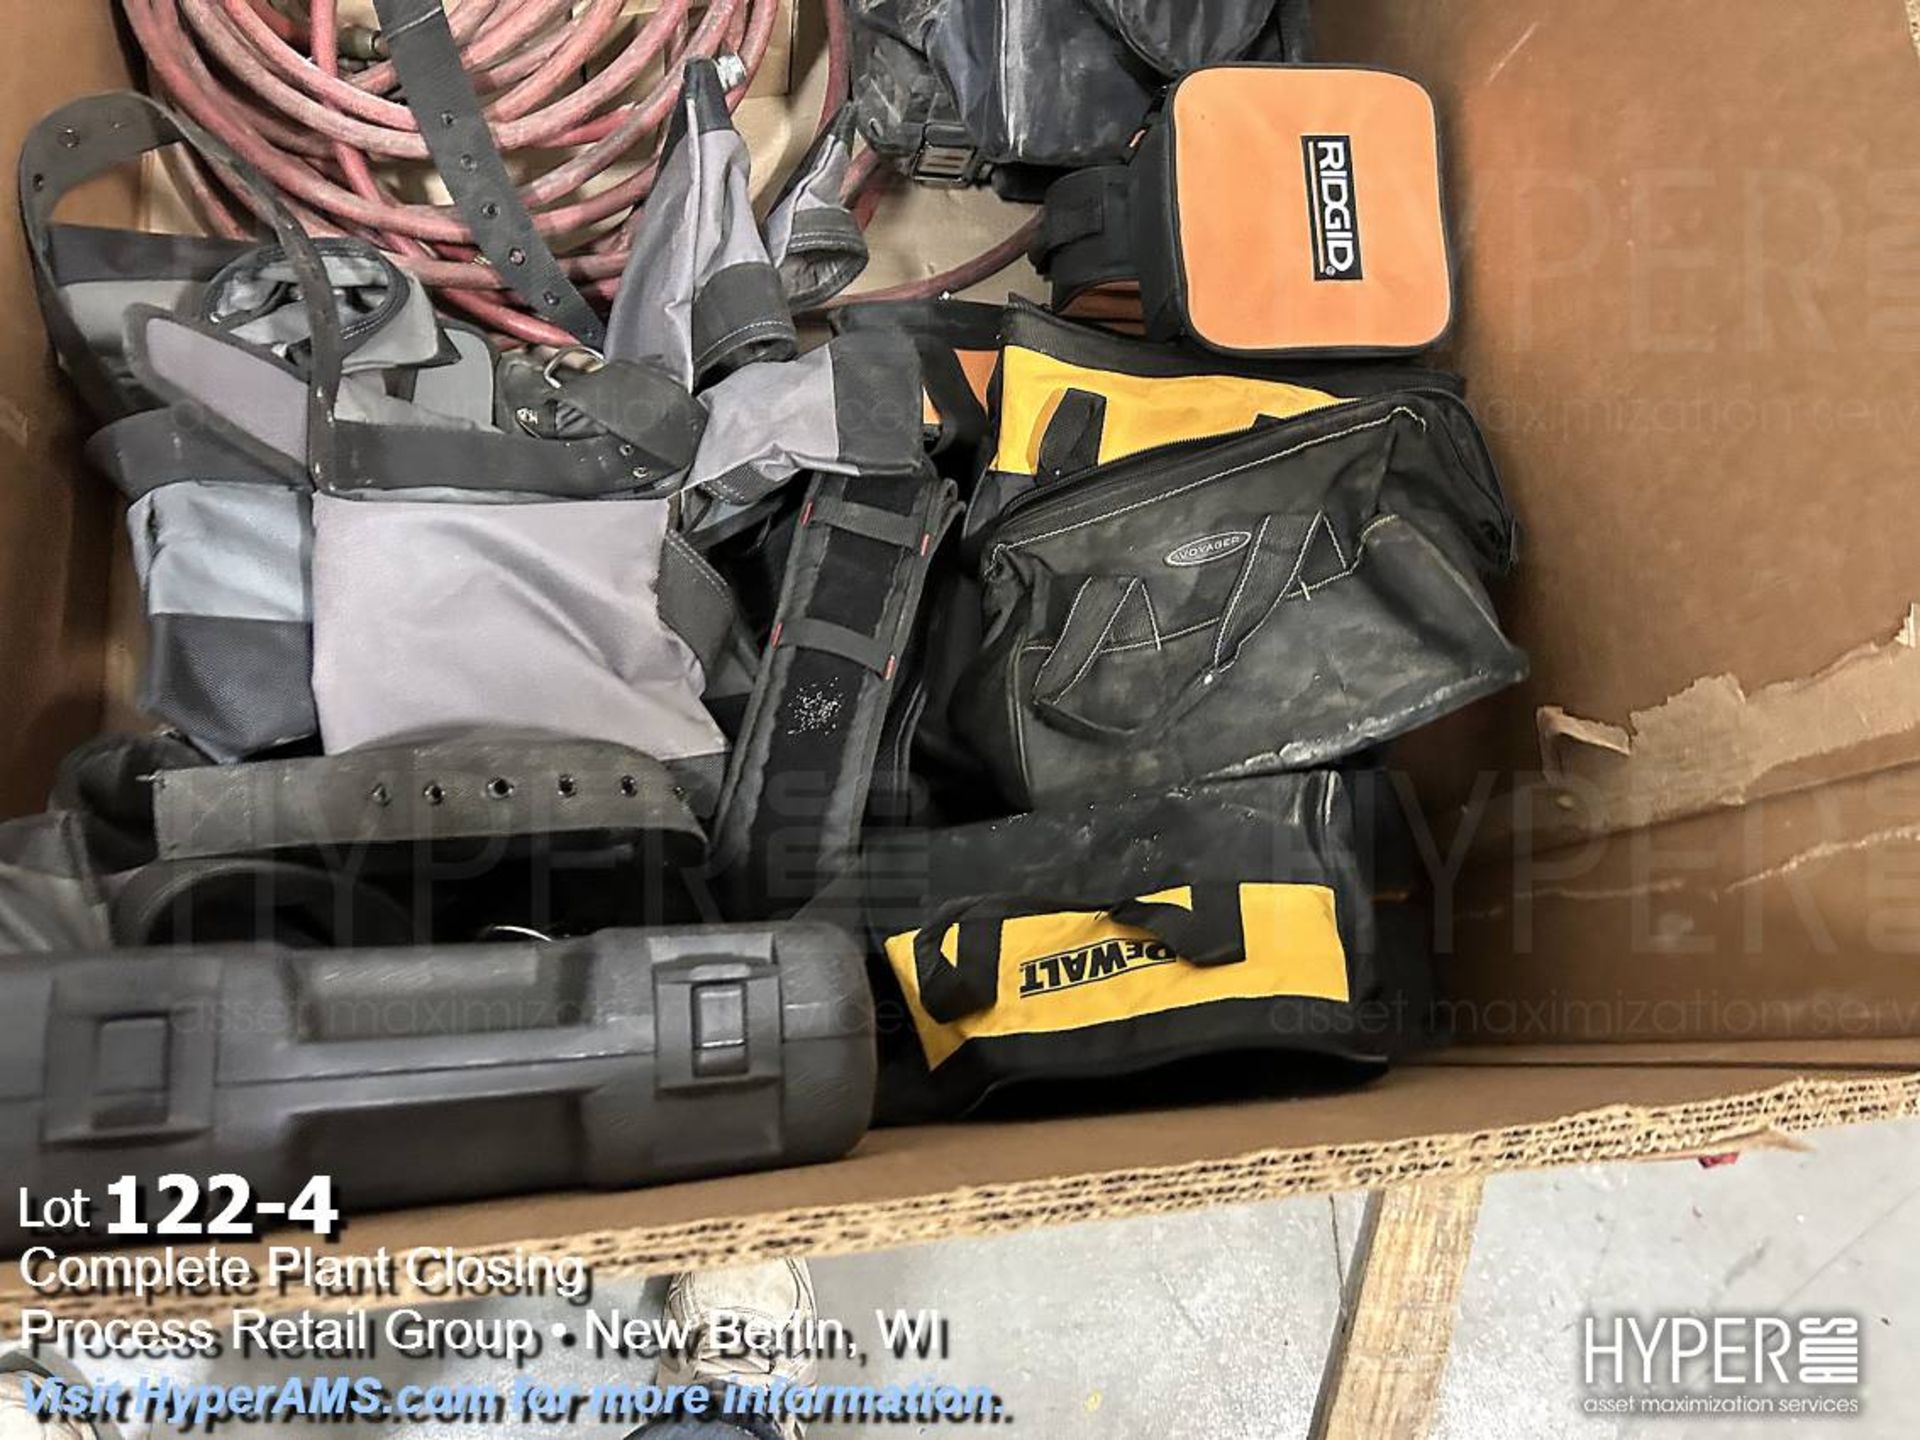 Air hose, tool belts, and tool bags - Image 4 of 5